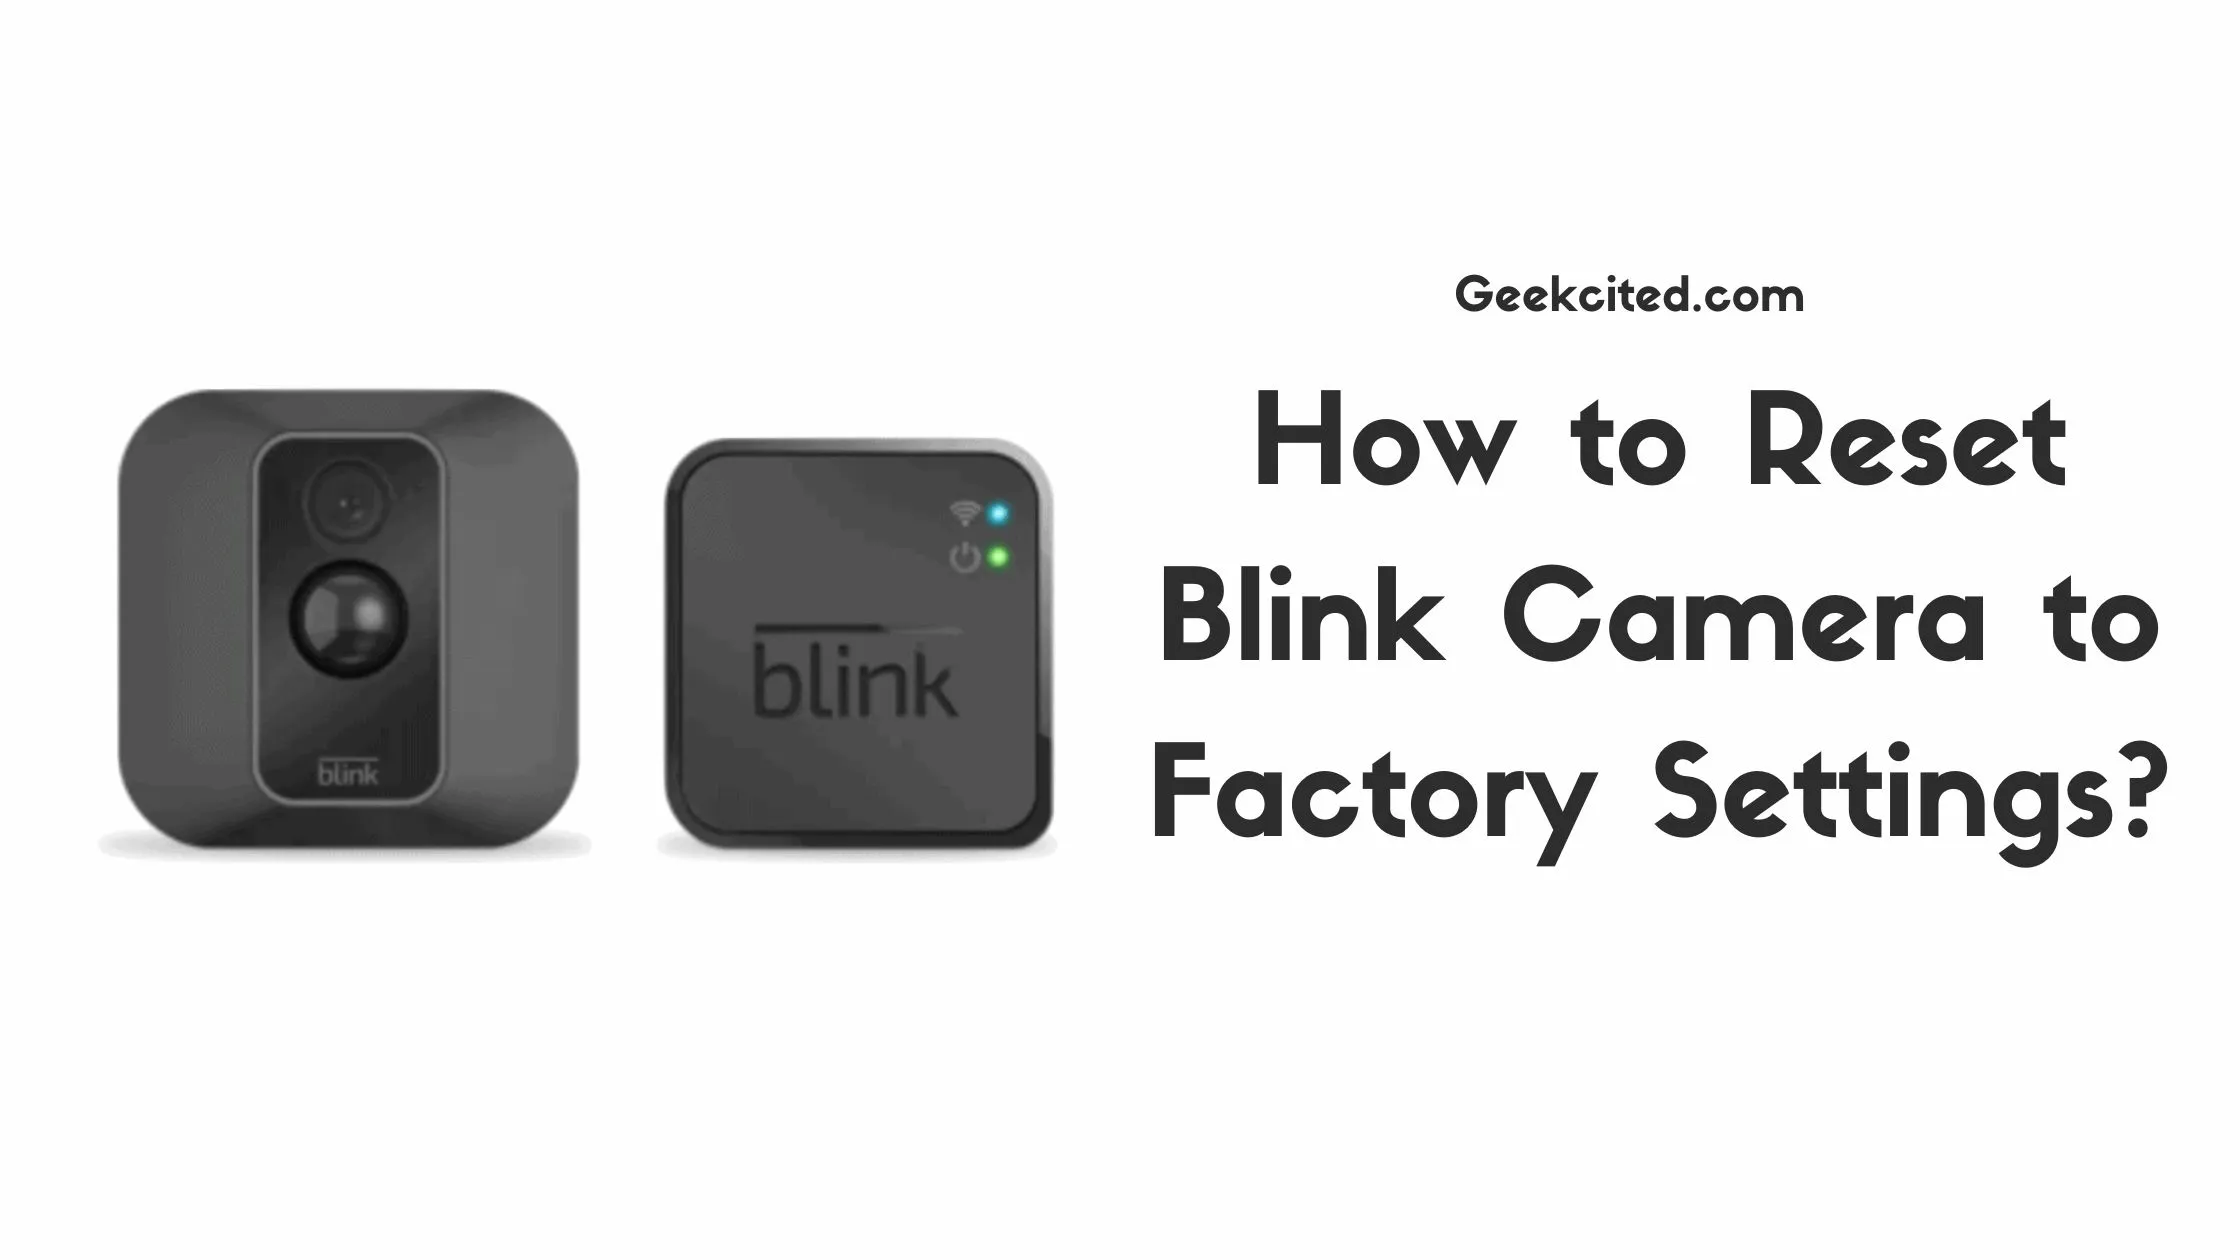 How to Reset Blink Camera to Factory Settings